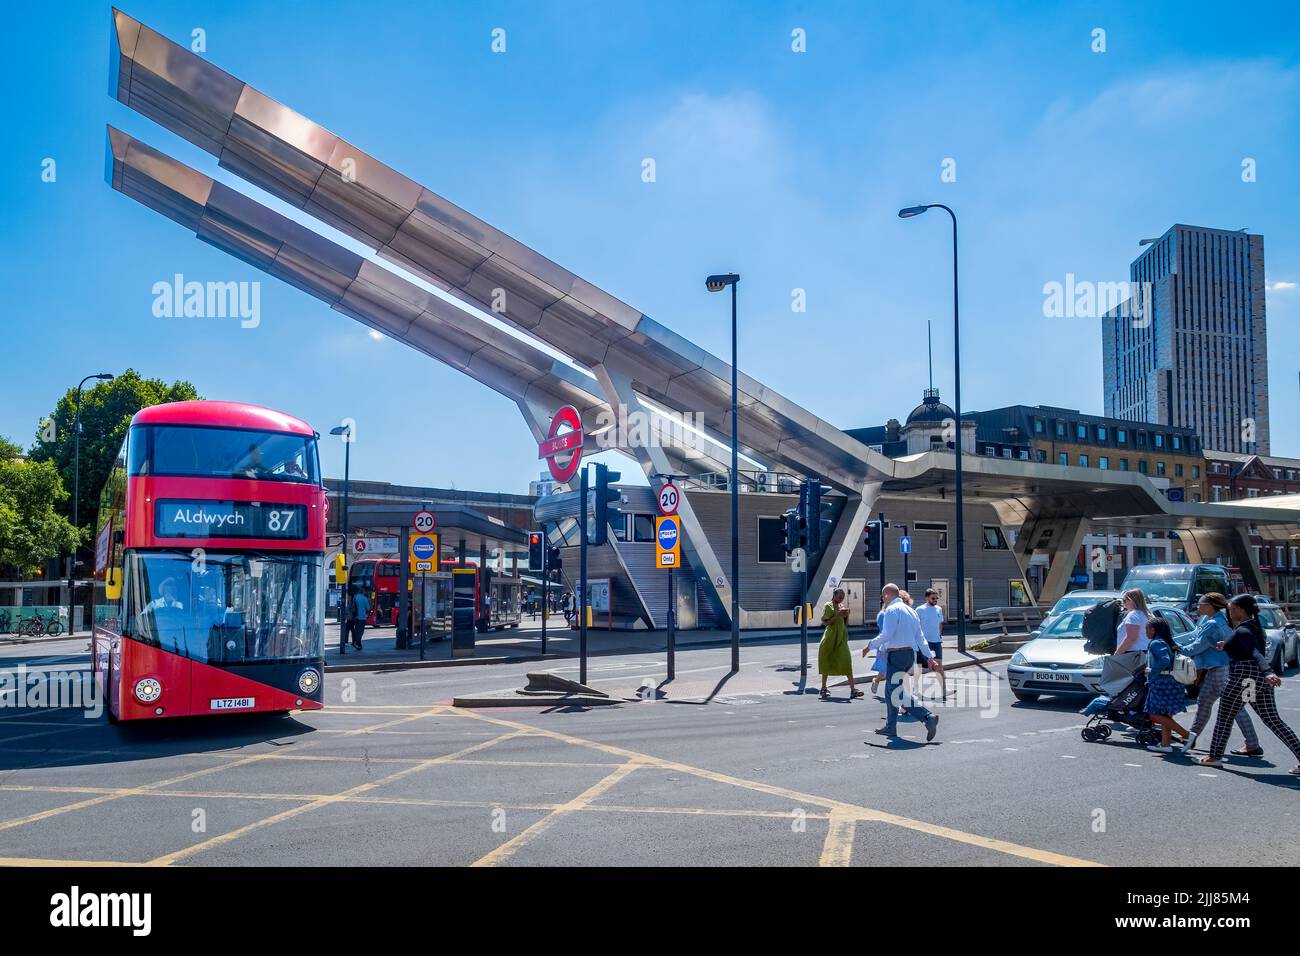 Vauxhall Cross, London, England; Vauxhall Bus Station designed by Arup Partners (2004), soon to be demolished for regeneration of the area Stock Photo